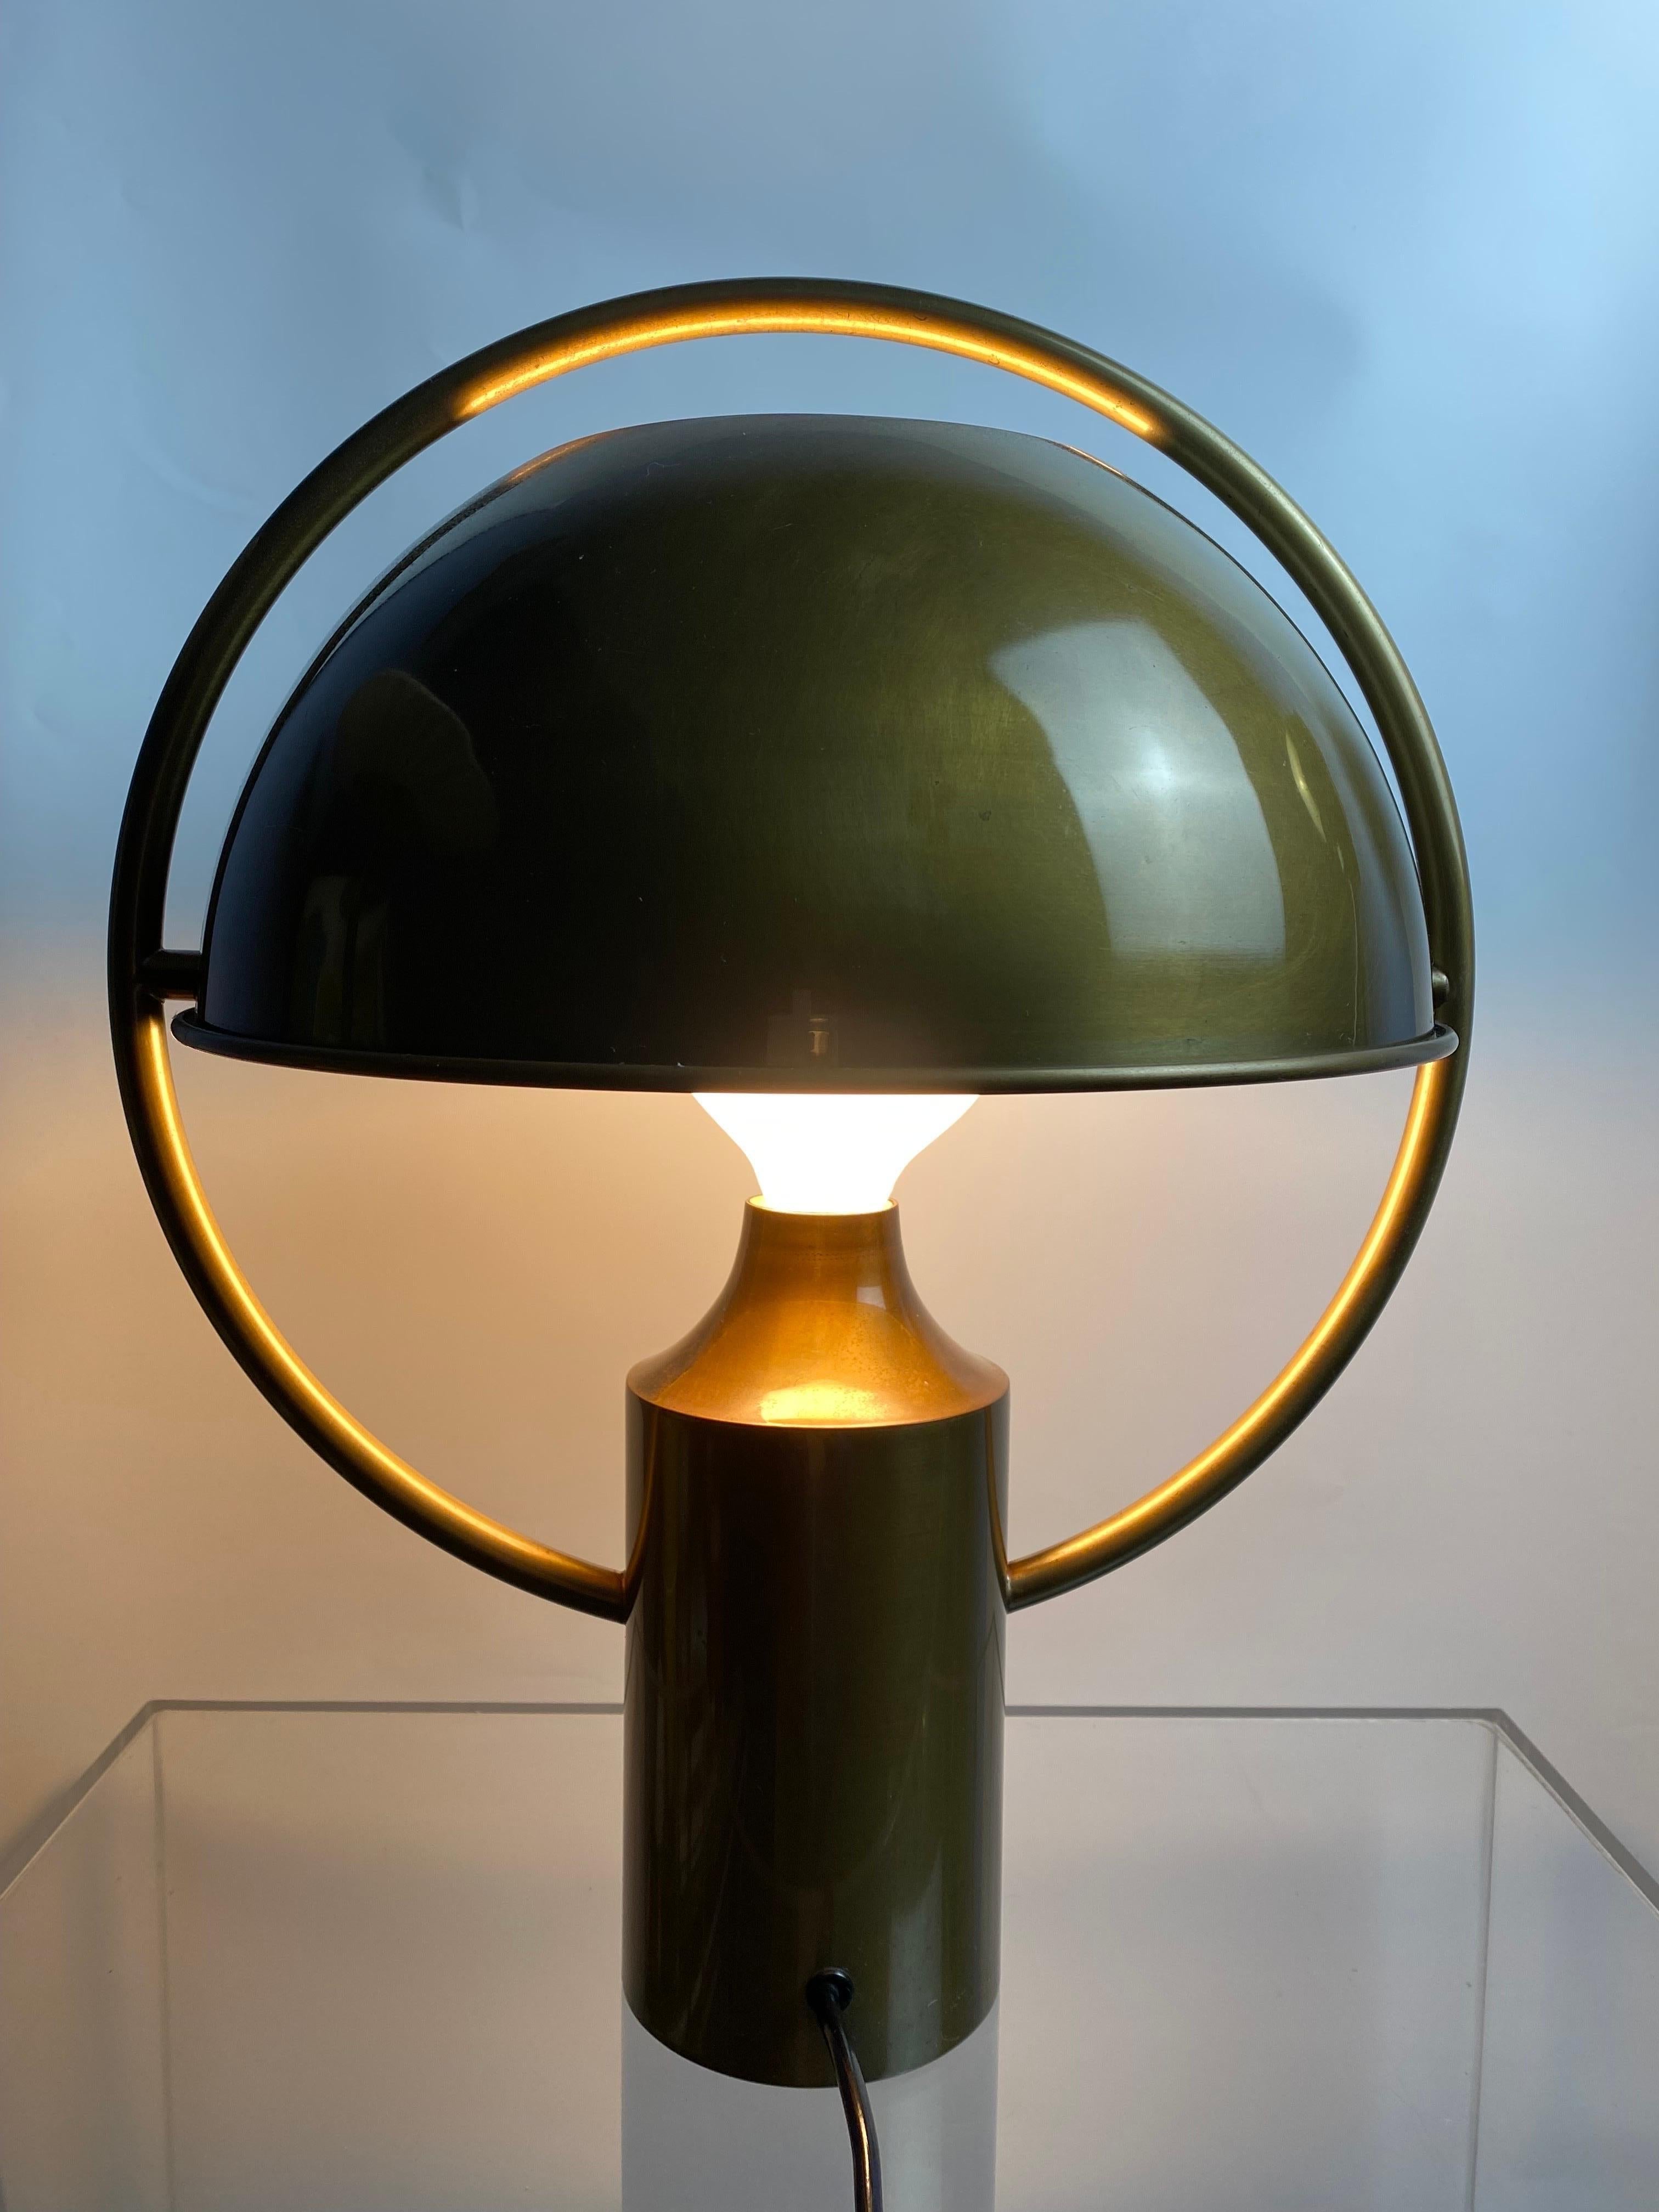 Rare German Midcentury Table Lamp in Solid Brass by Günter&Florian Schulz 1970s For Sale 3